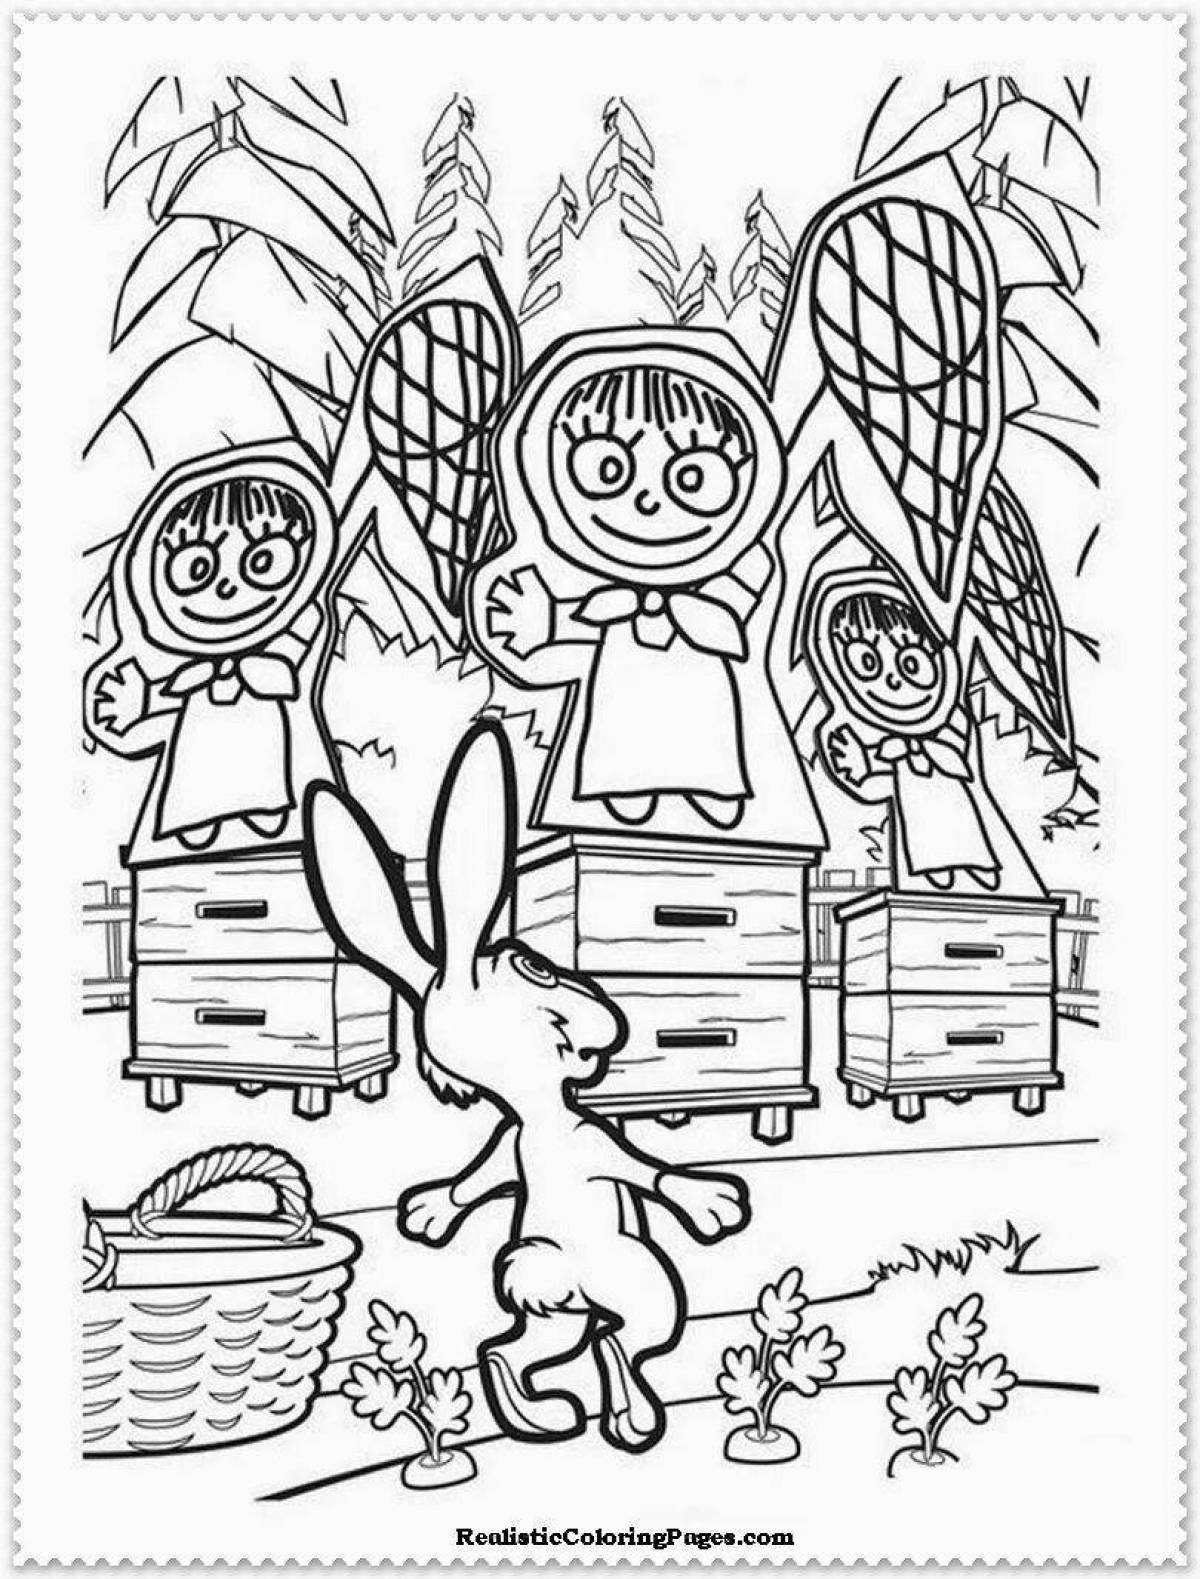 Fancy bear and hare coloring page